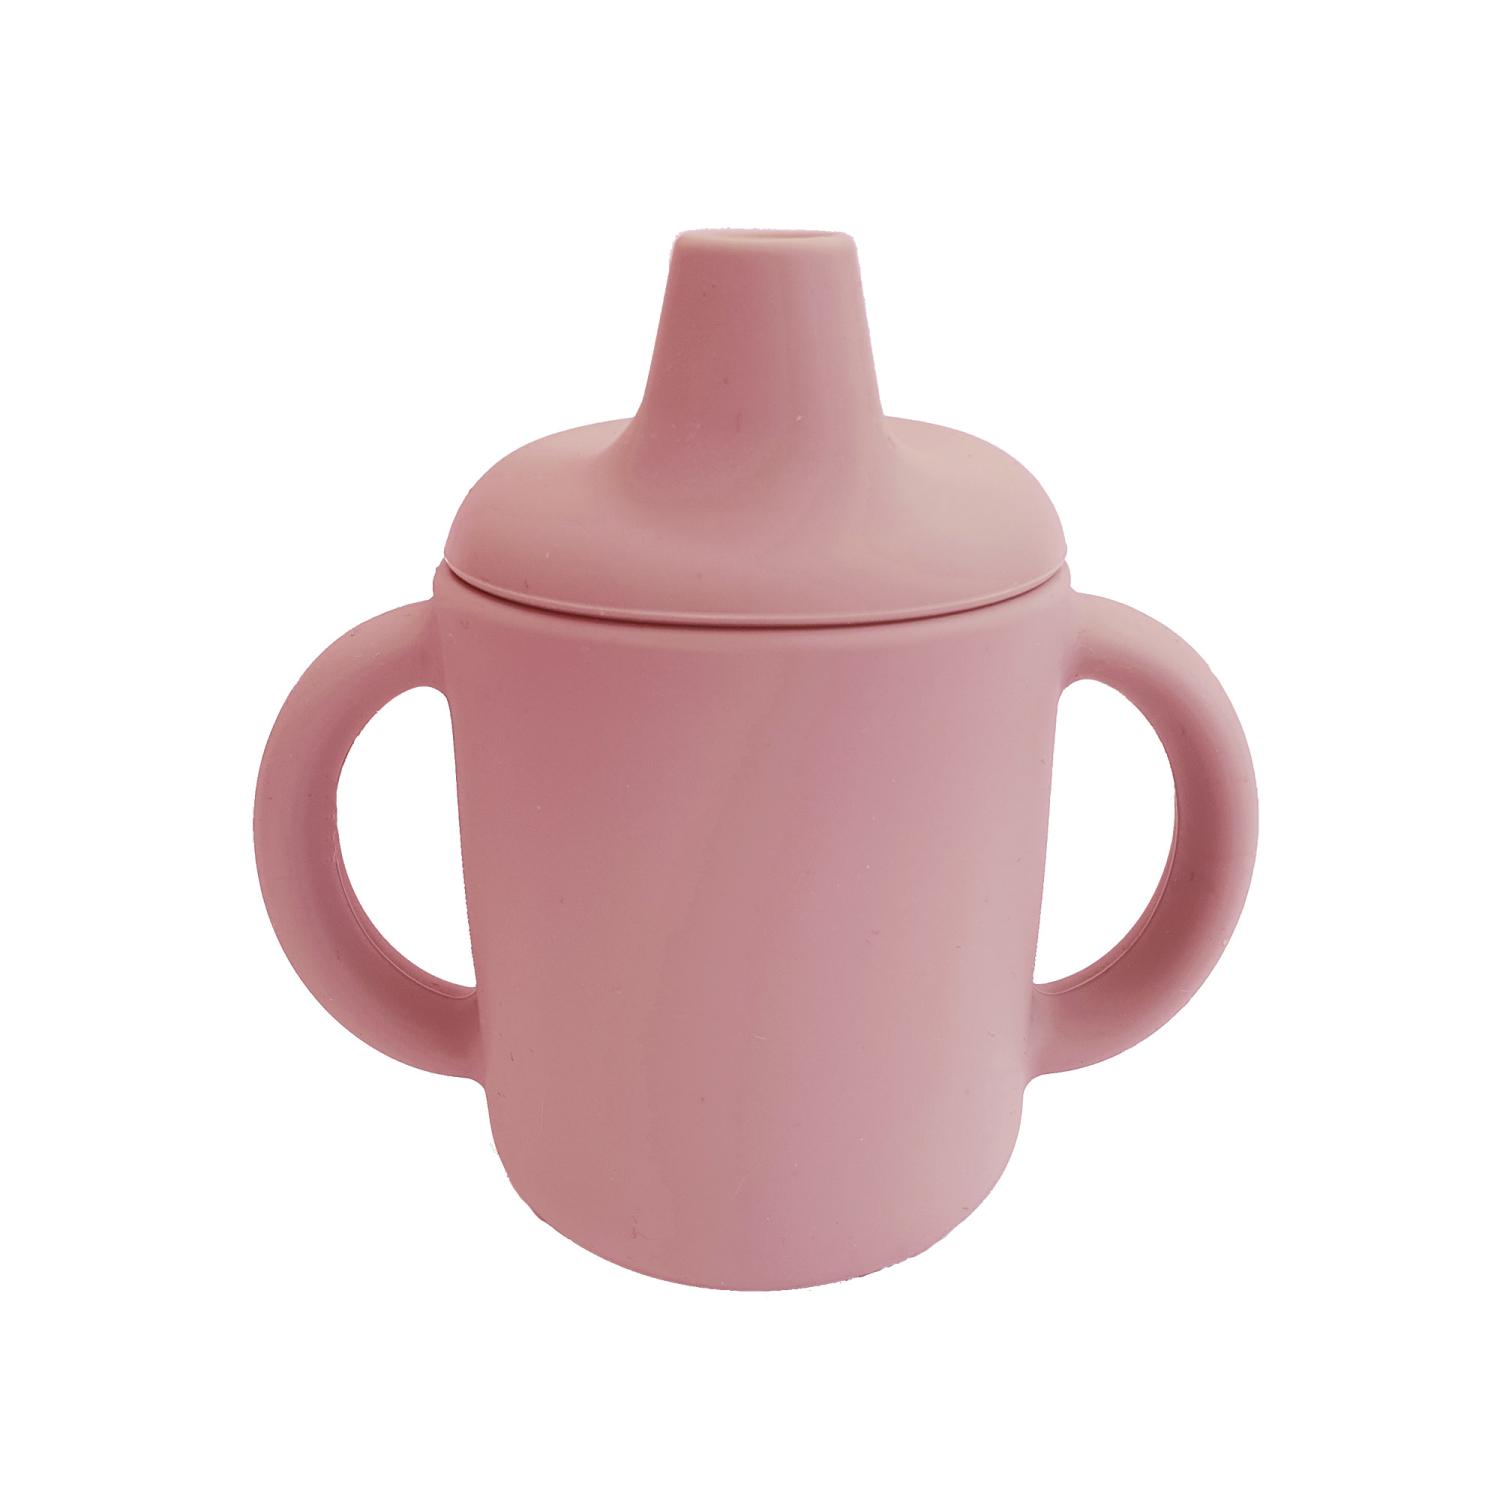 Sippy cup silicone dusty rose